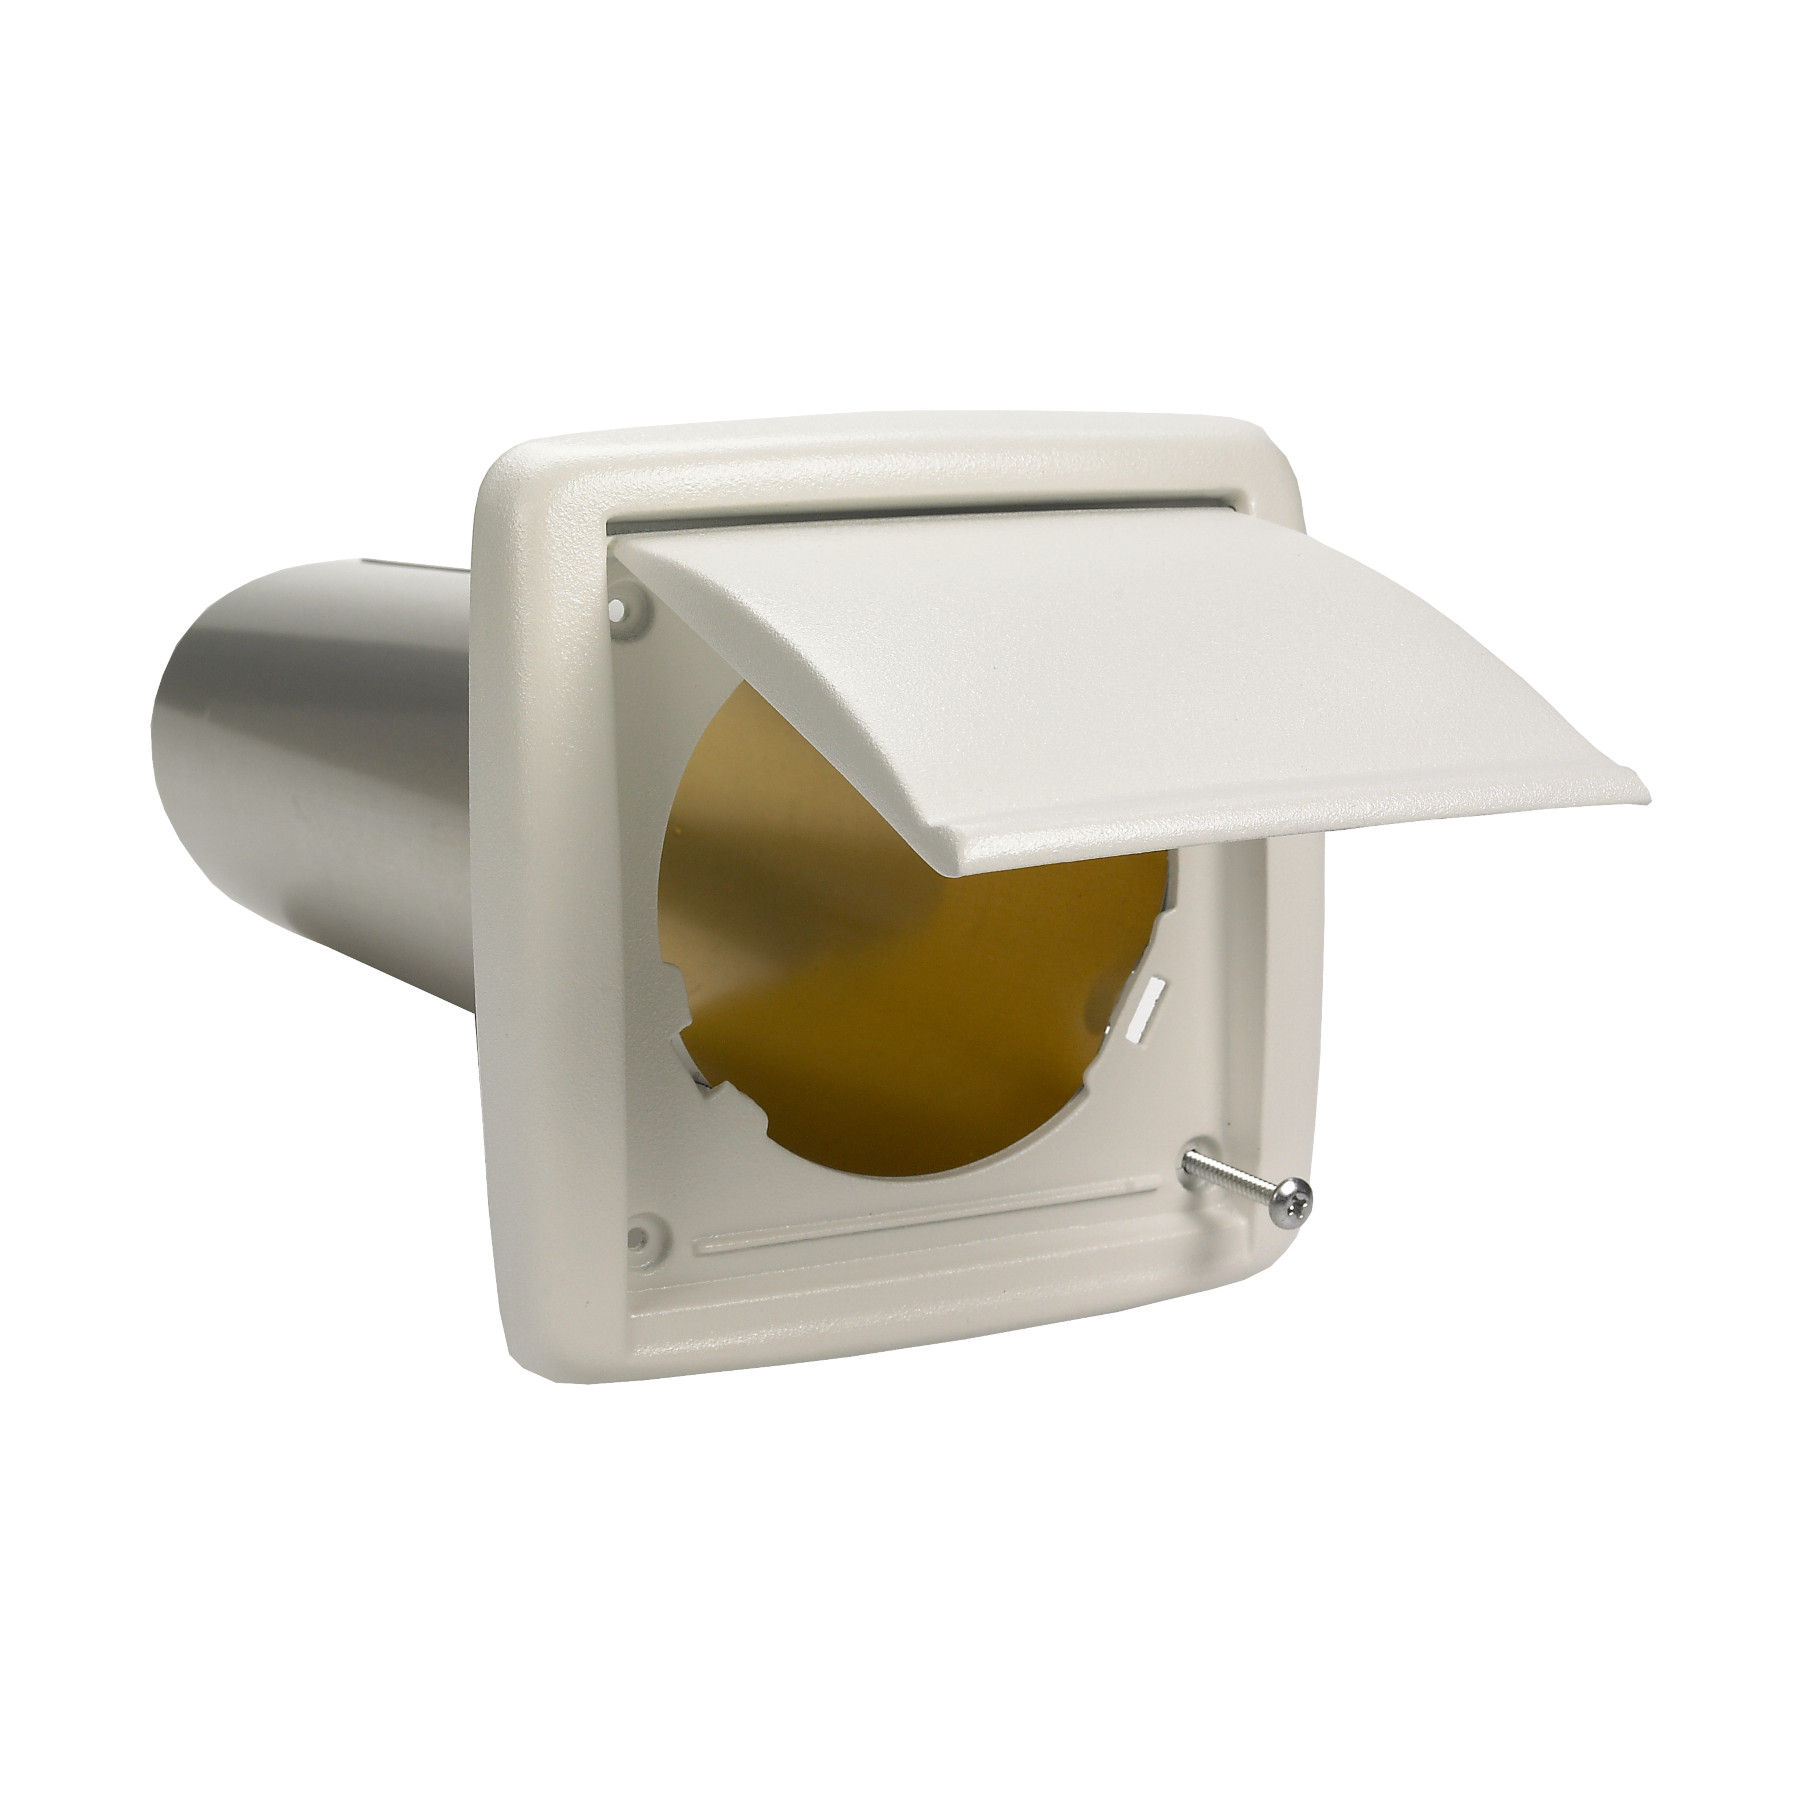 BROAN-NUTONE LLC WVK2A Wall Vent Kit - image 3 of 4